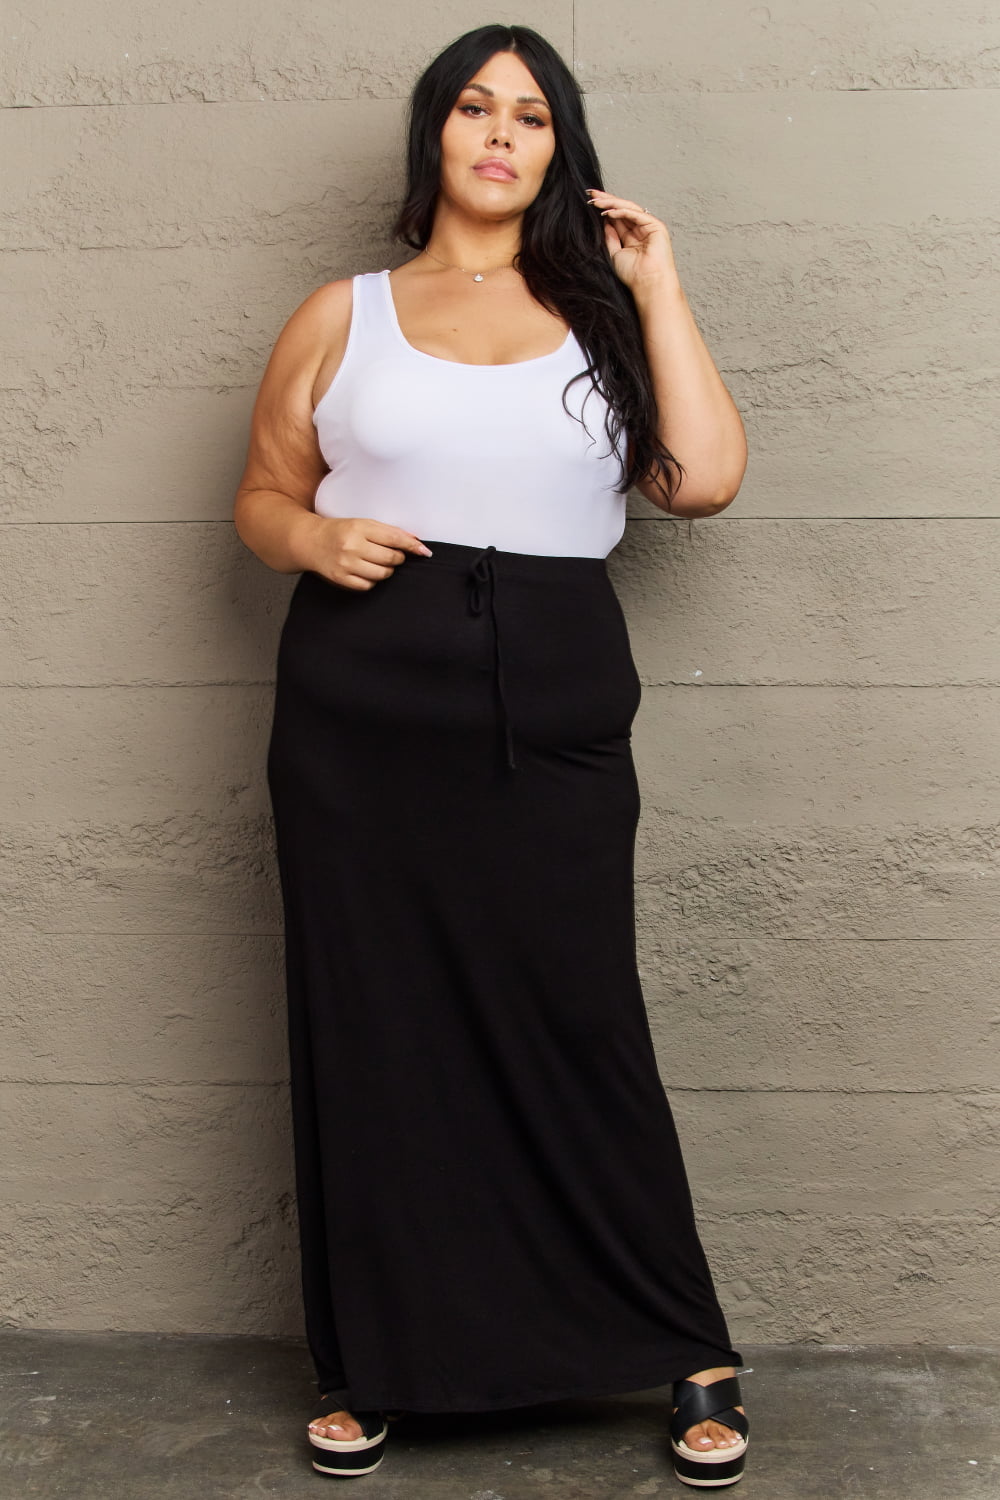 For The Day Flare Maxi Skirt in BlackMaxi SkirtCulture Code